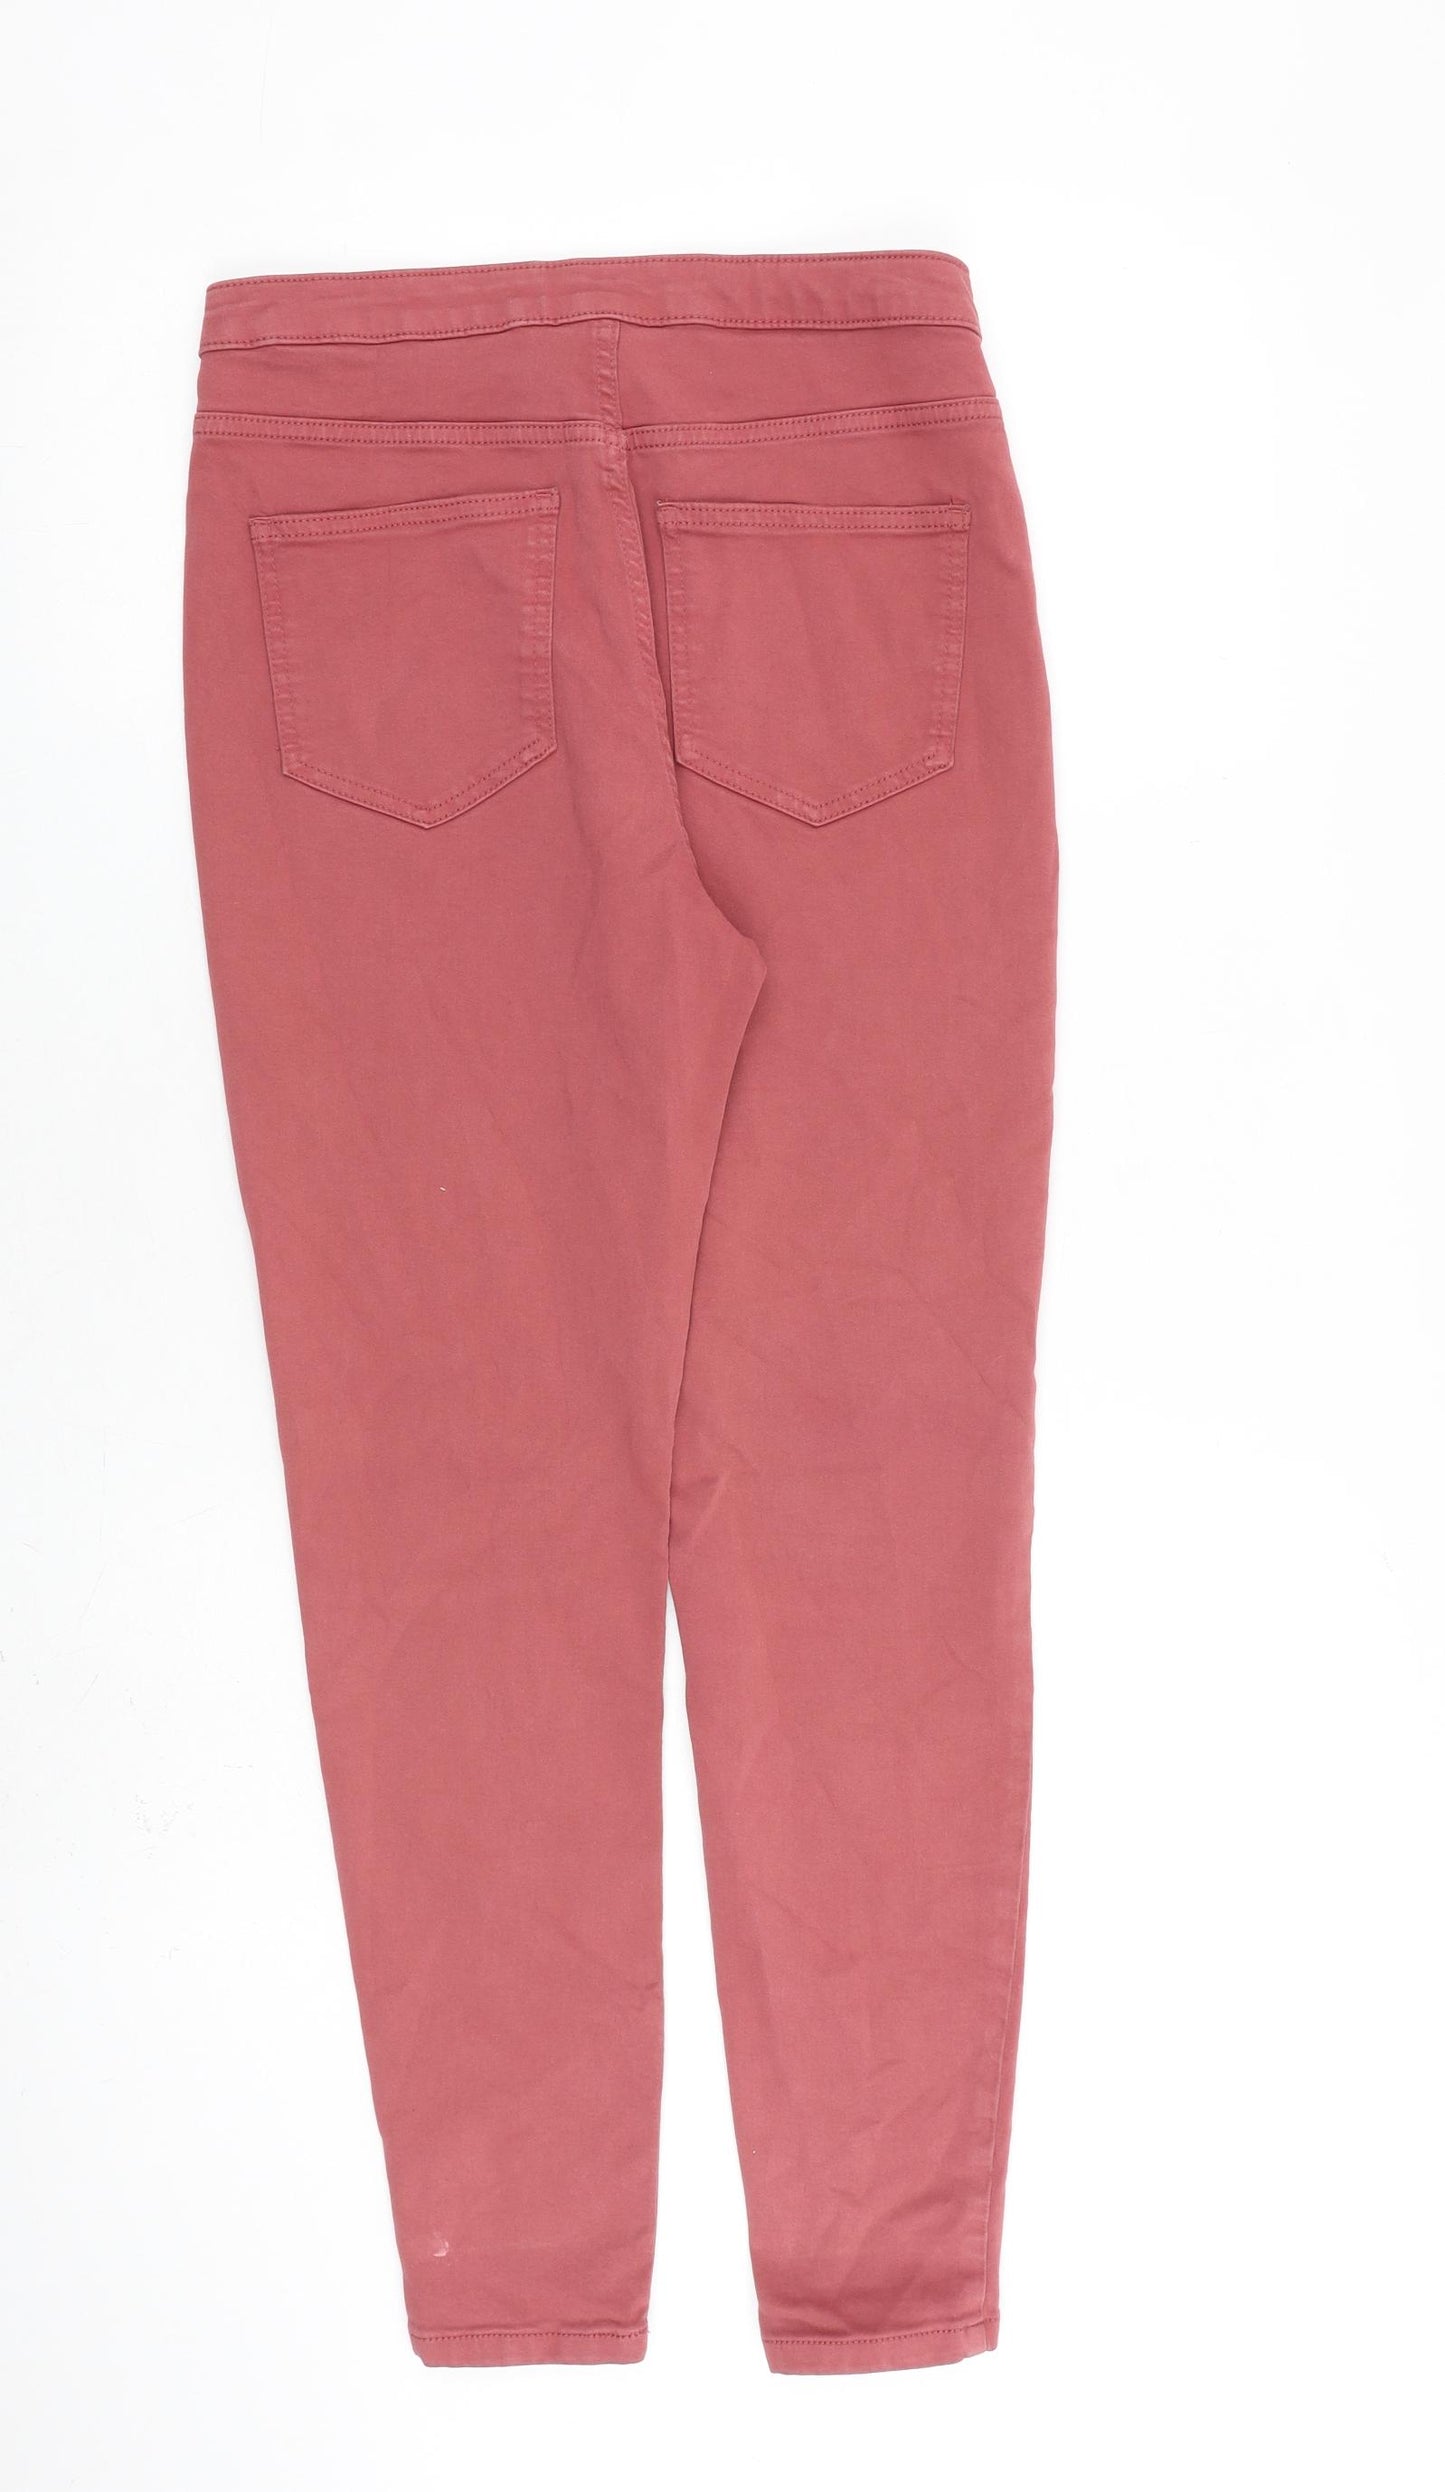 Marks and Spencer Womens Pink Cotton Skinny Jeans Size 12 L28 in Slim Zip